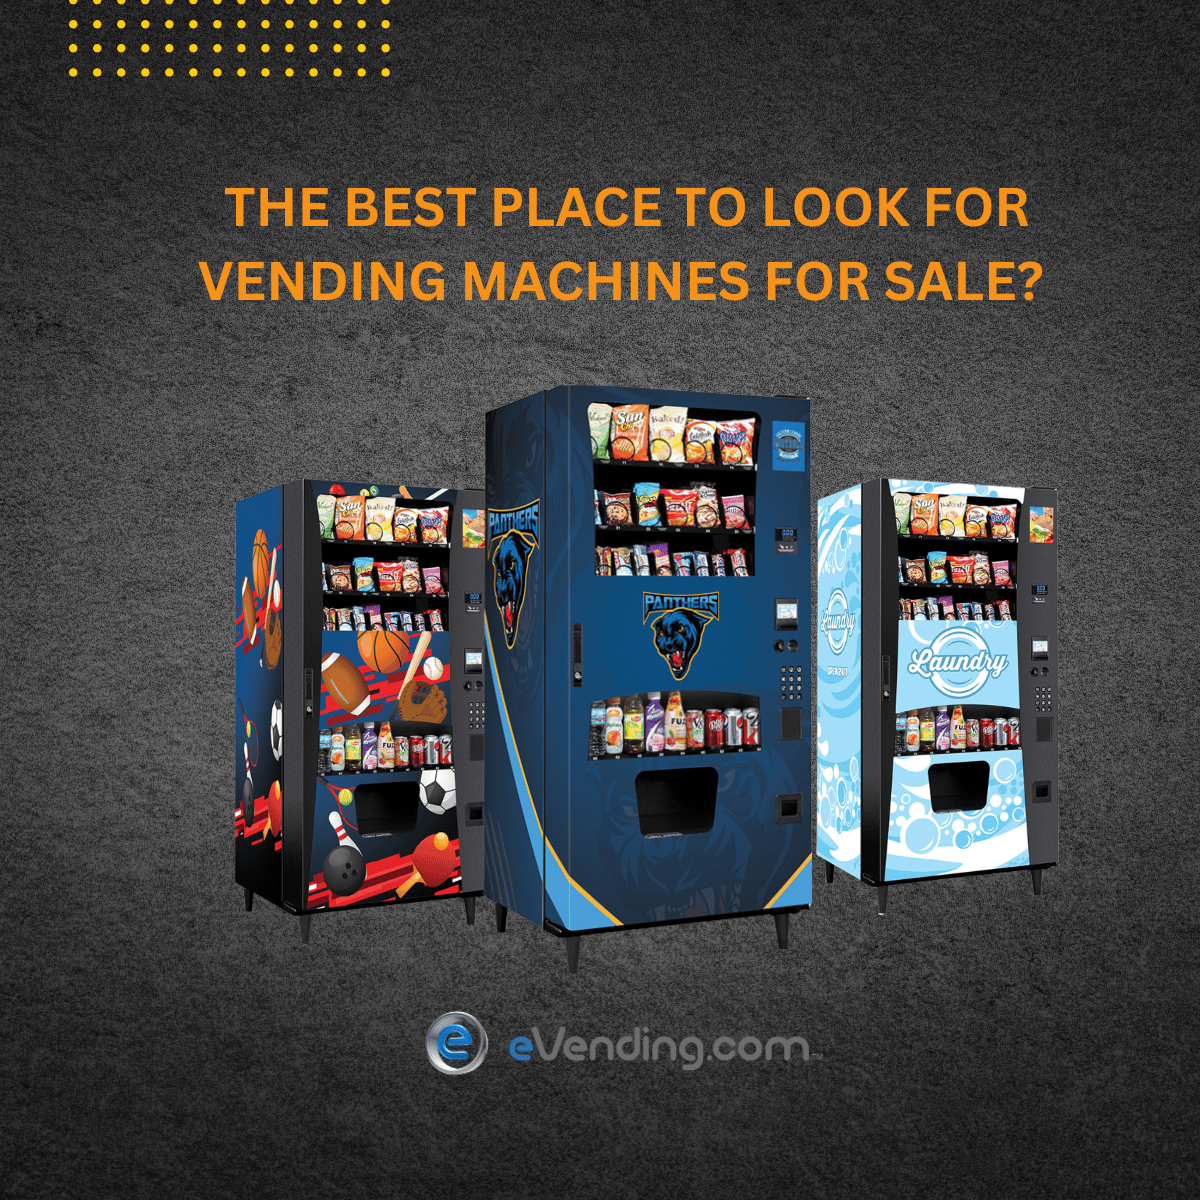 WHERE CAN YOU FIND GOOD DEALS ON VENDING MACHINE SALES?